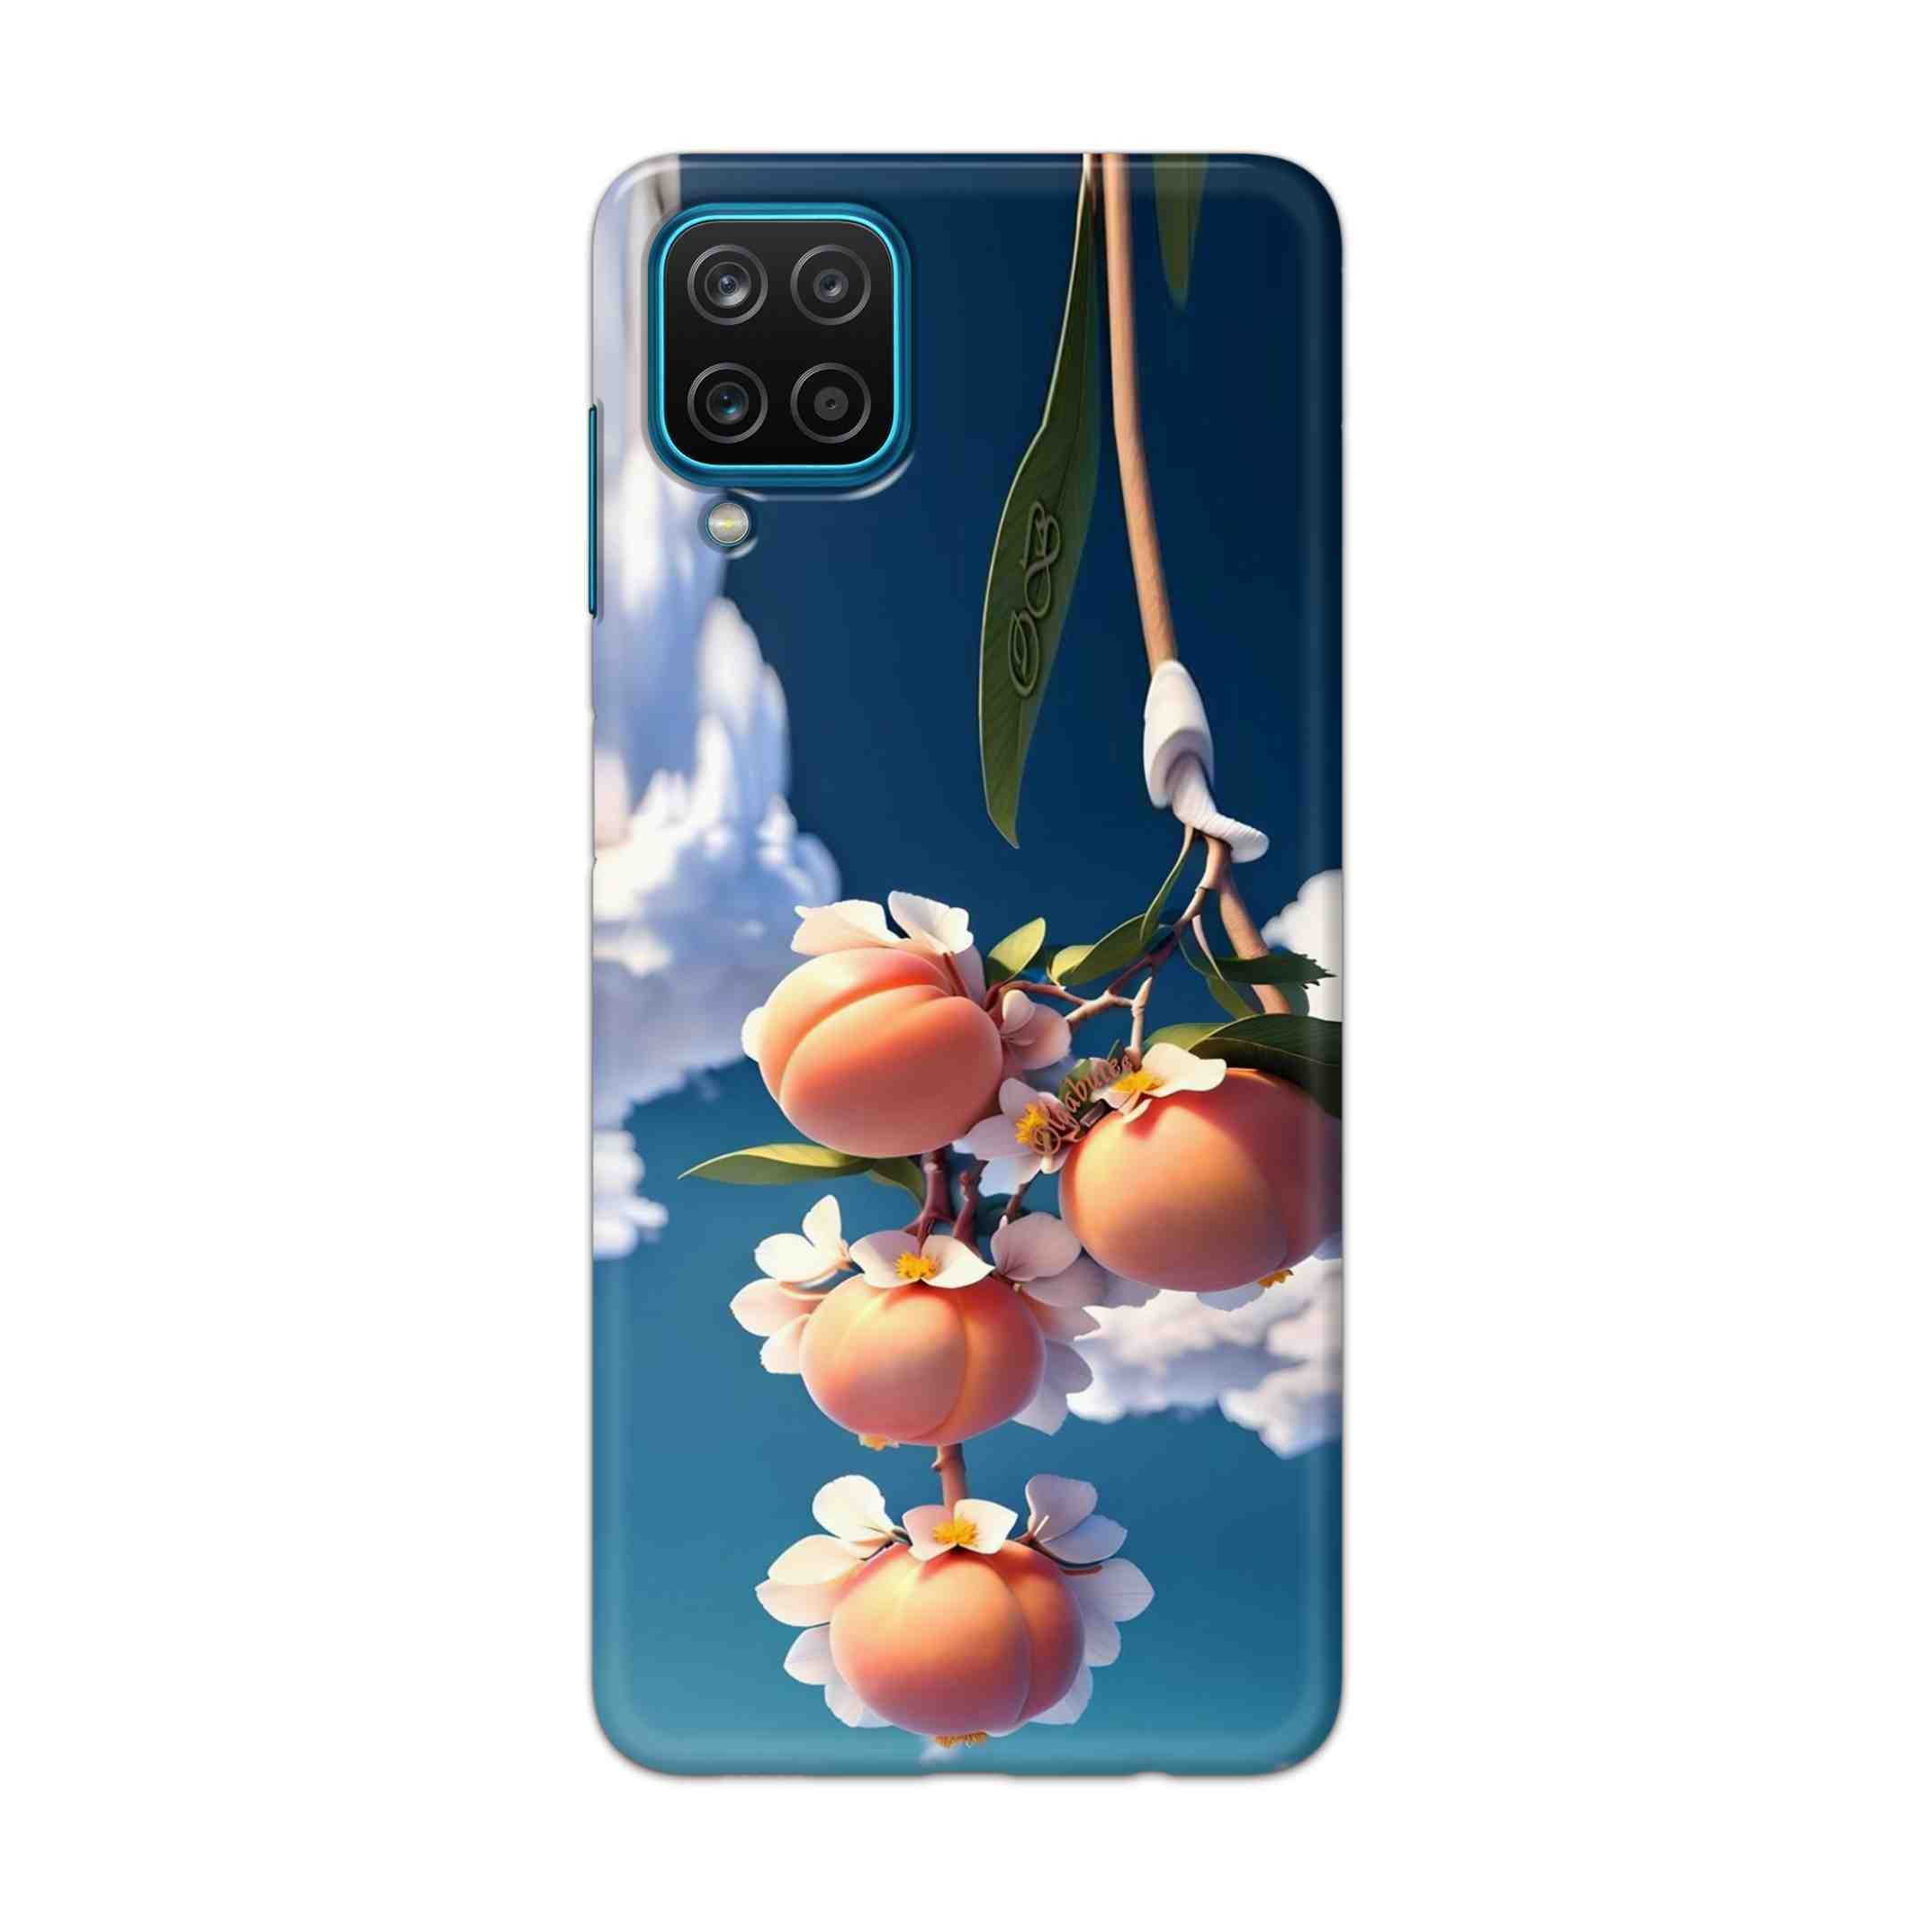 Buy Fruit Hard Back Mobile Phone Case Cover For Samsung Galaxy A12 Online